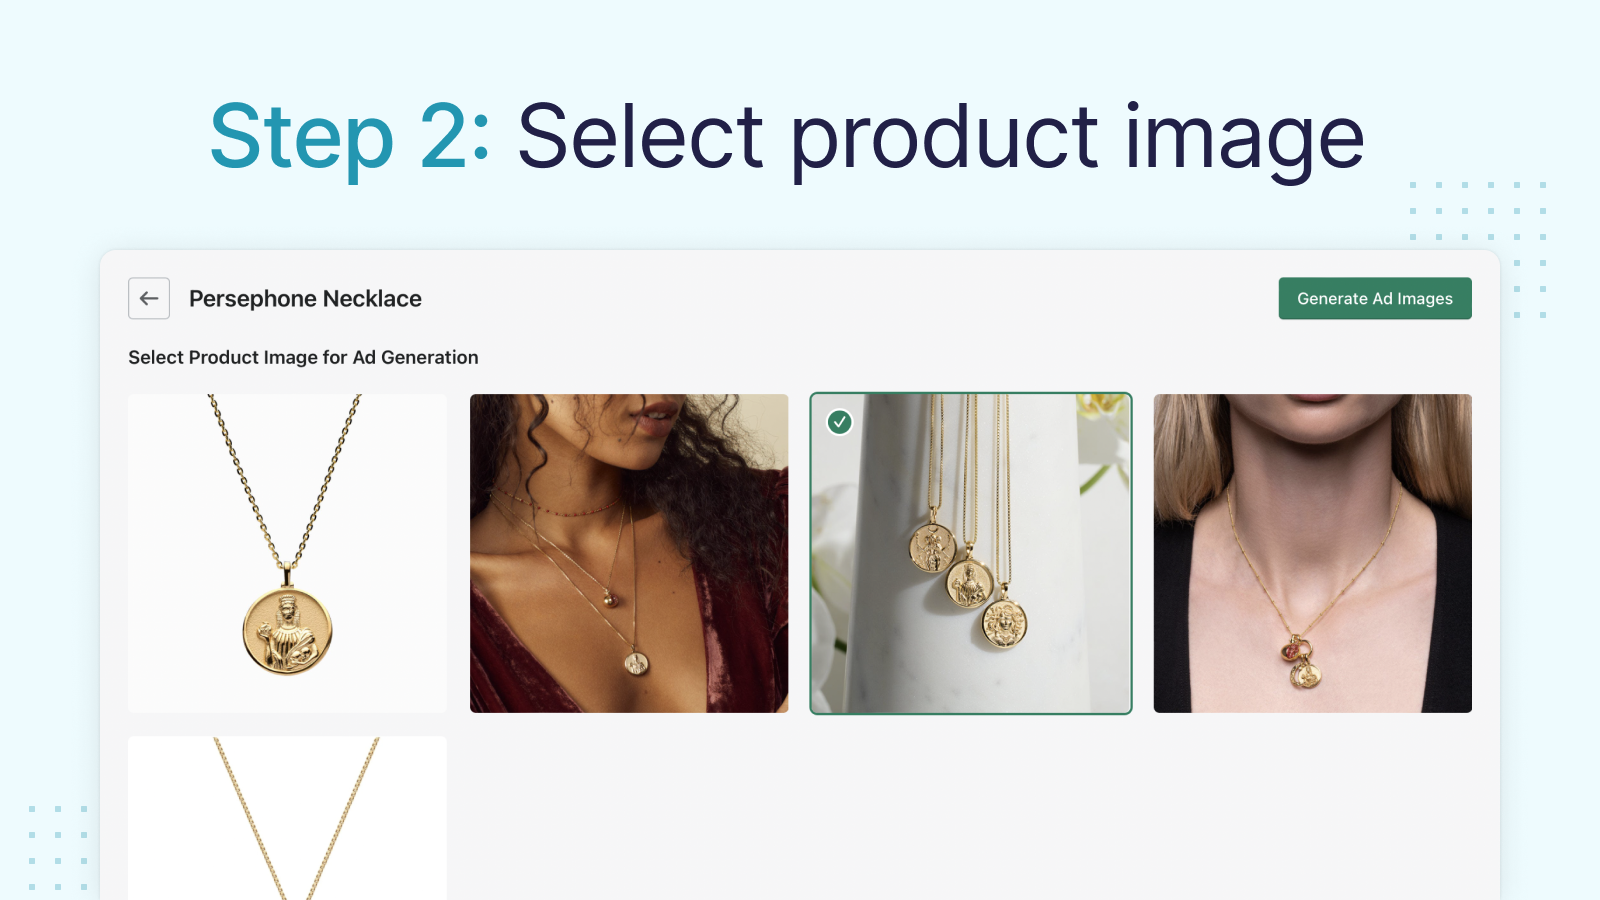 Step 2: Select product image